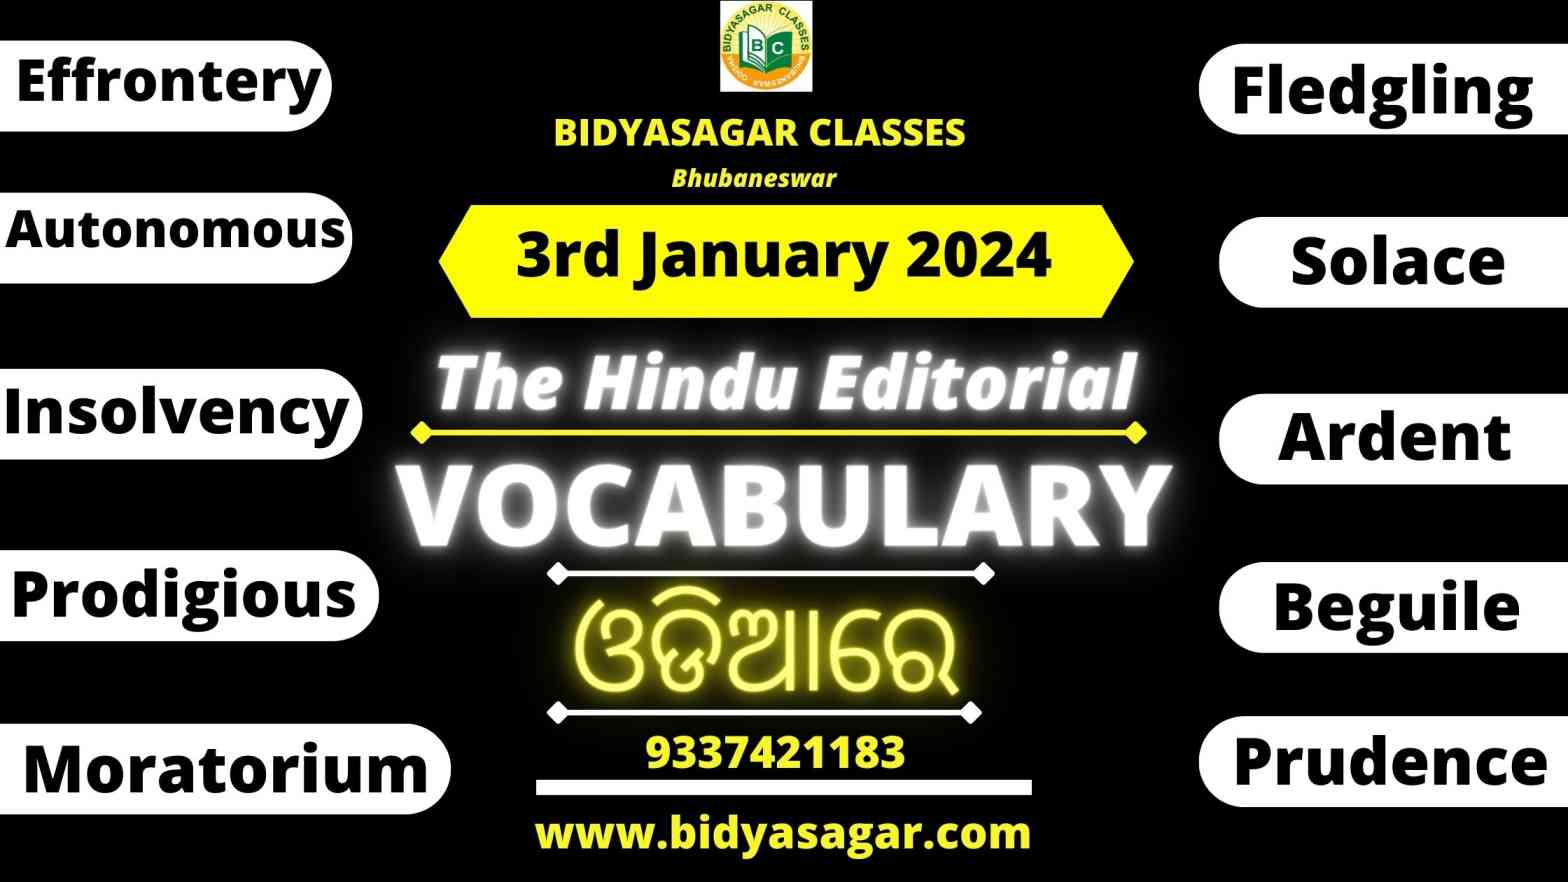 The Hindu Editorial Vocabulary of 3rd January 2024